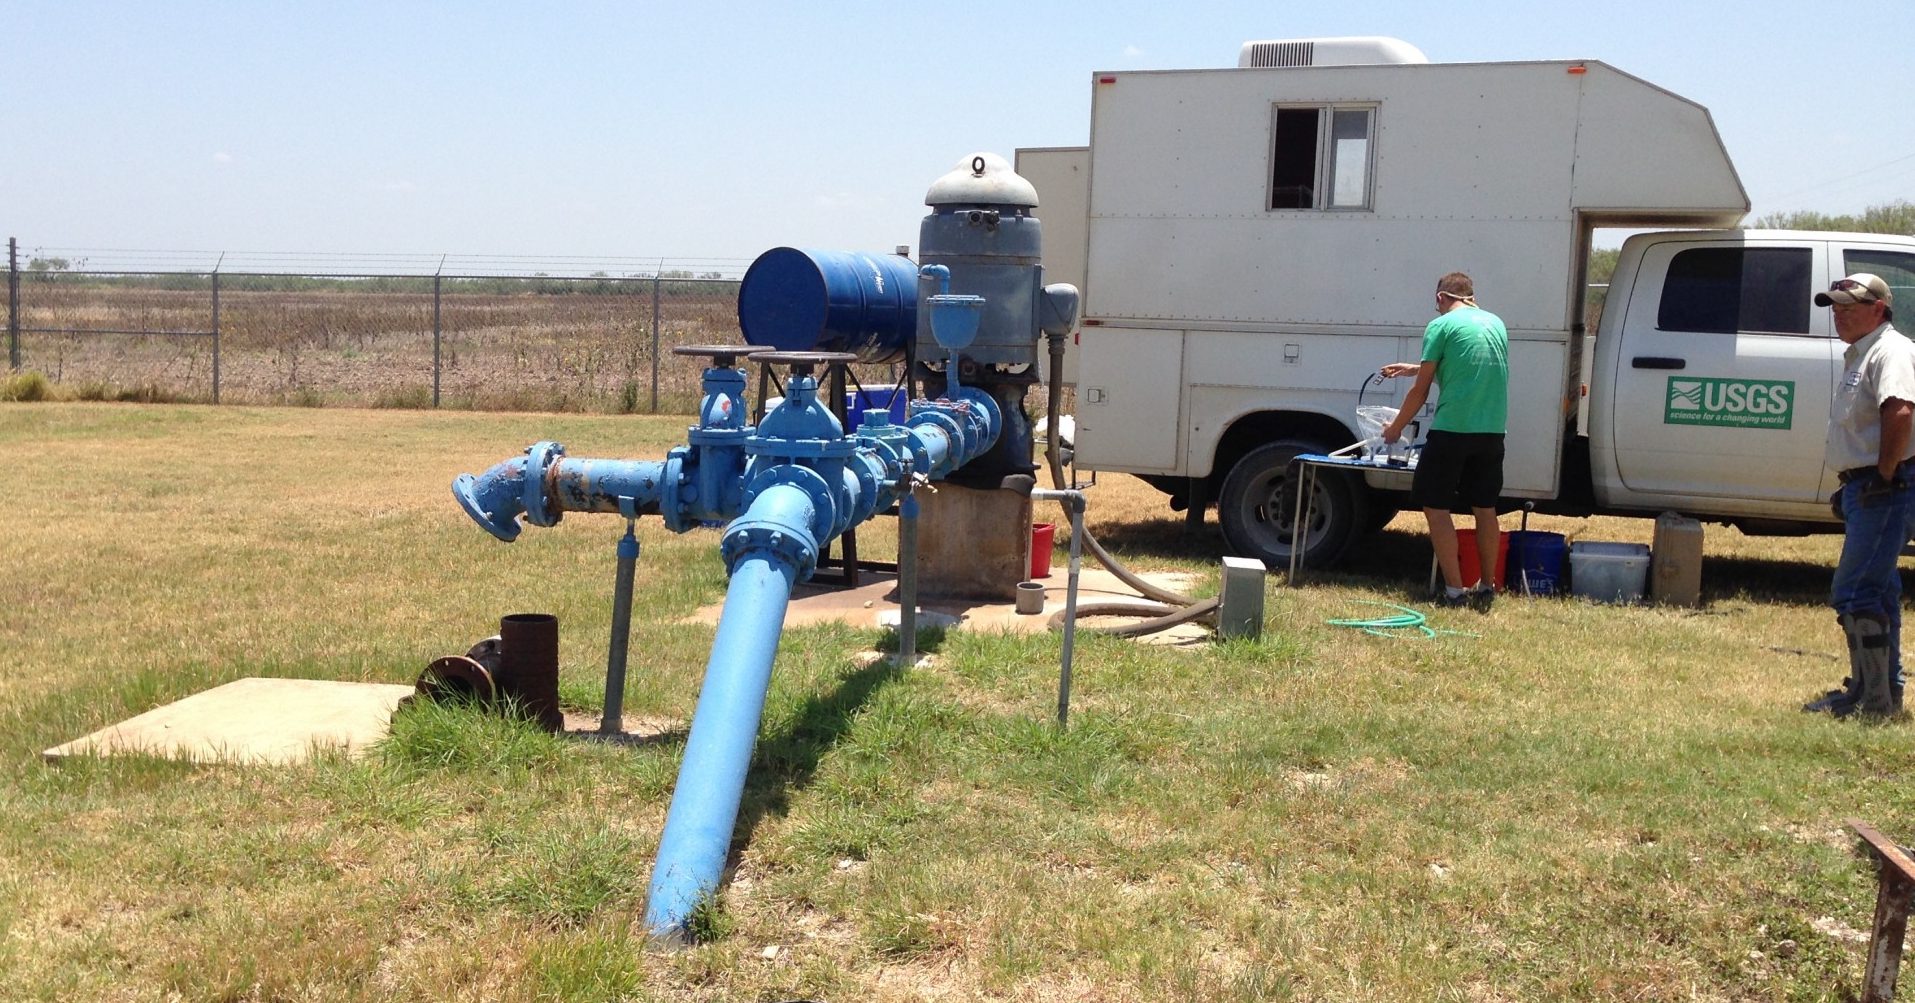 Unconventional Oil and Gas Production Not Currently Affecting Drinking Water Quality